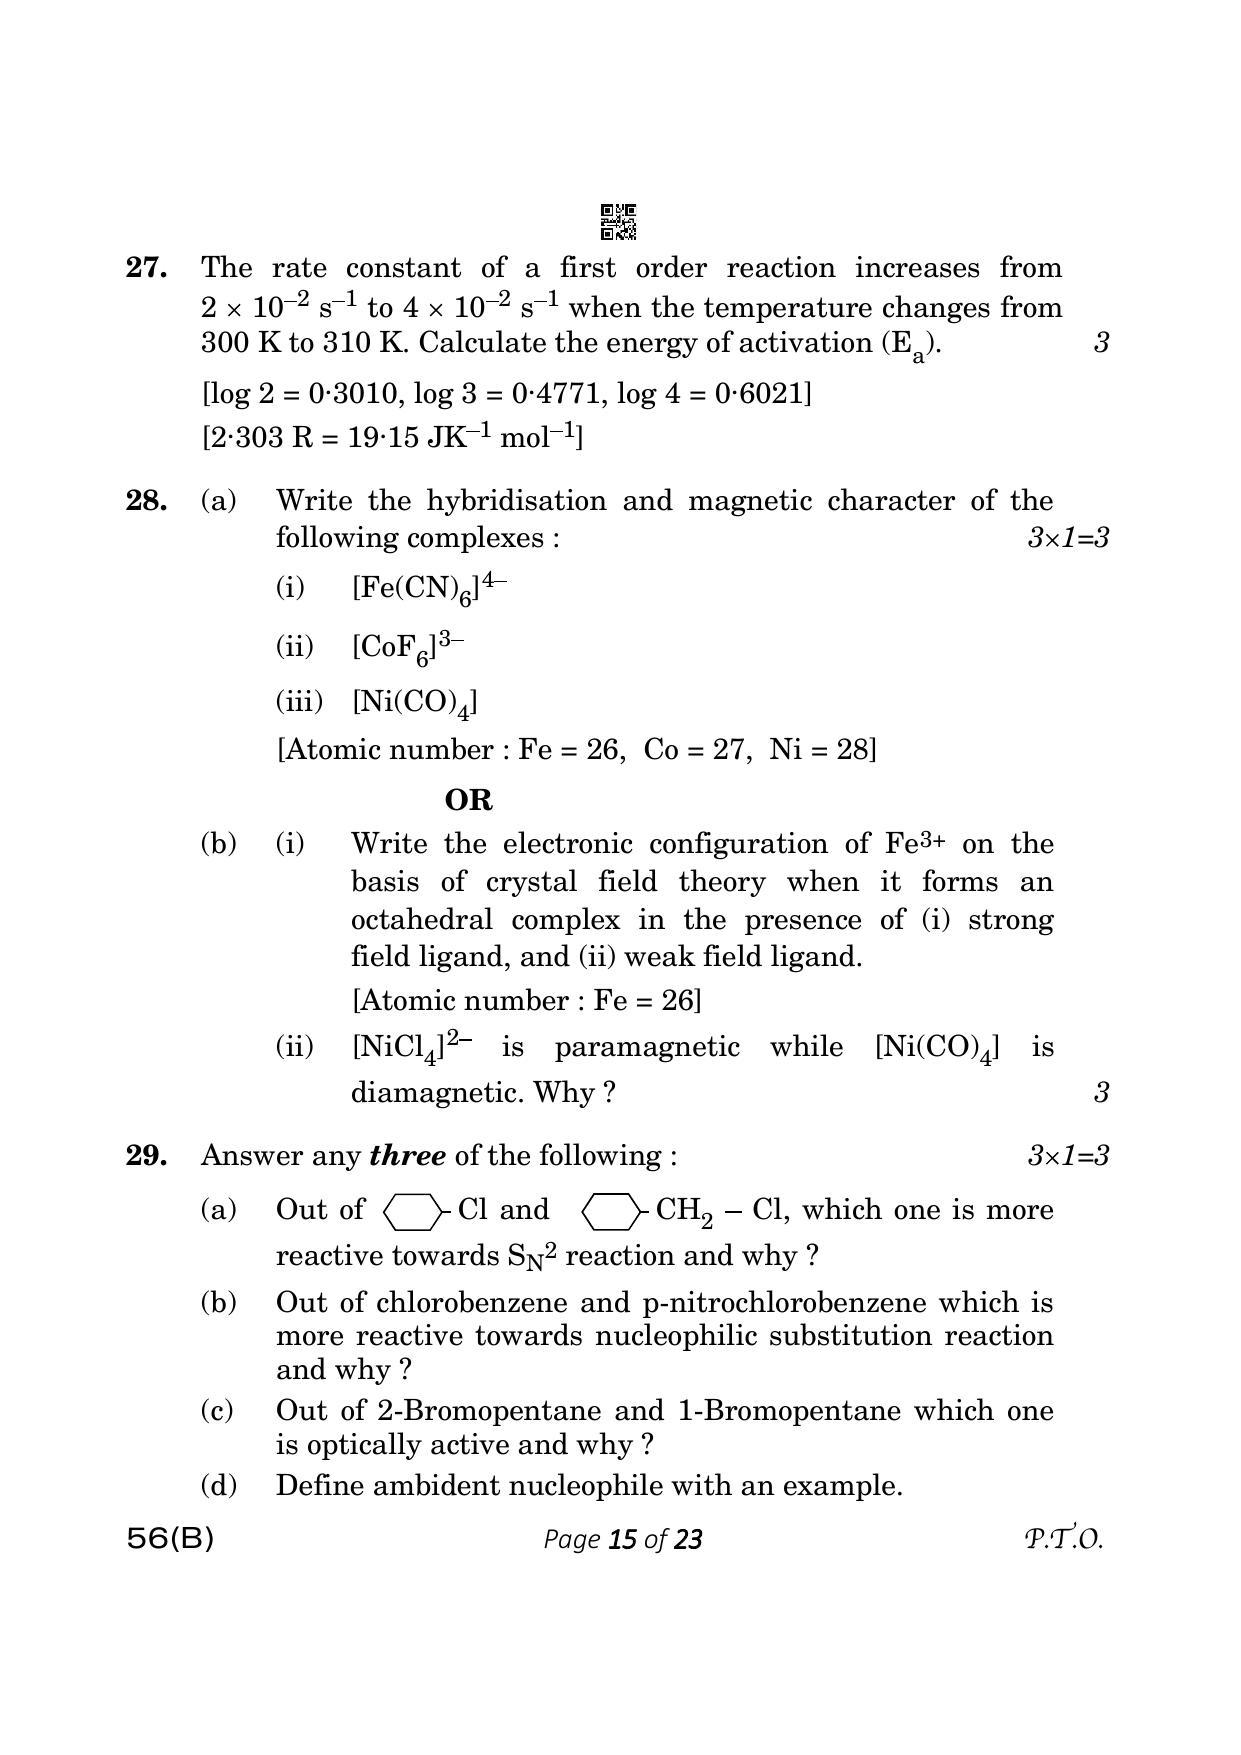 CBSE Class 12 56-B Chemistry 2023 (Compartment) Question Paper - Page 15